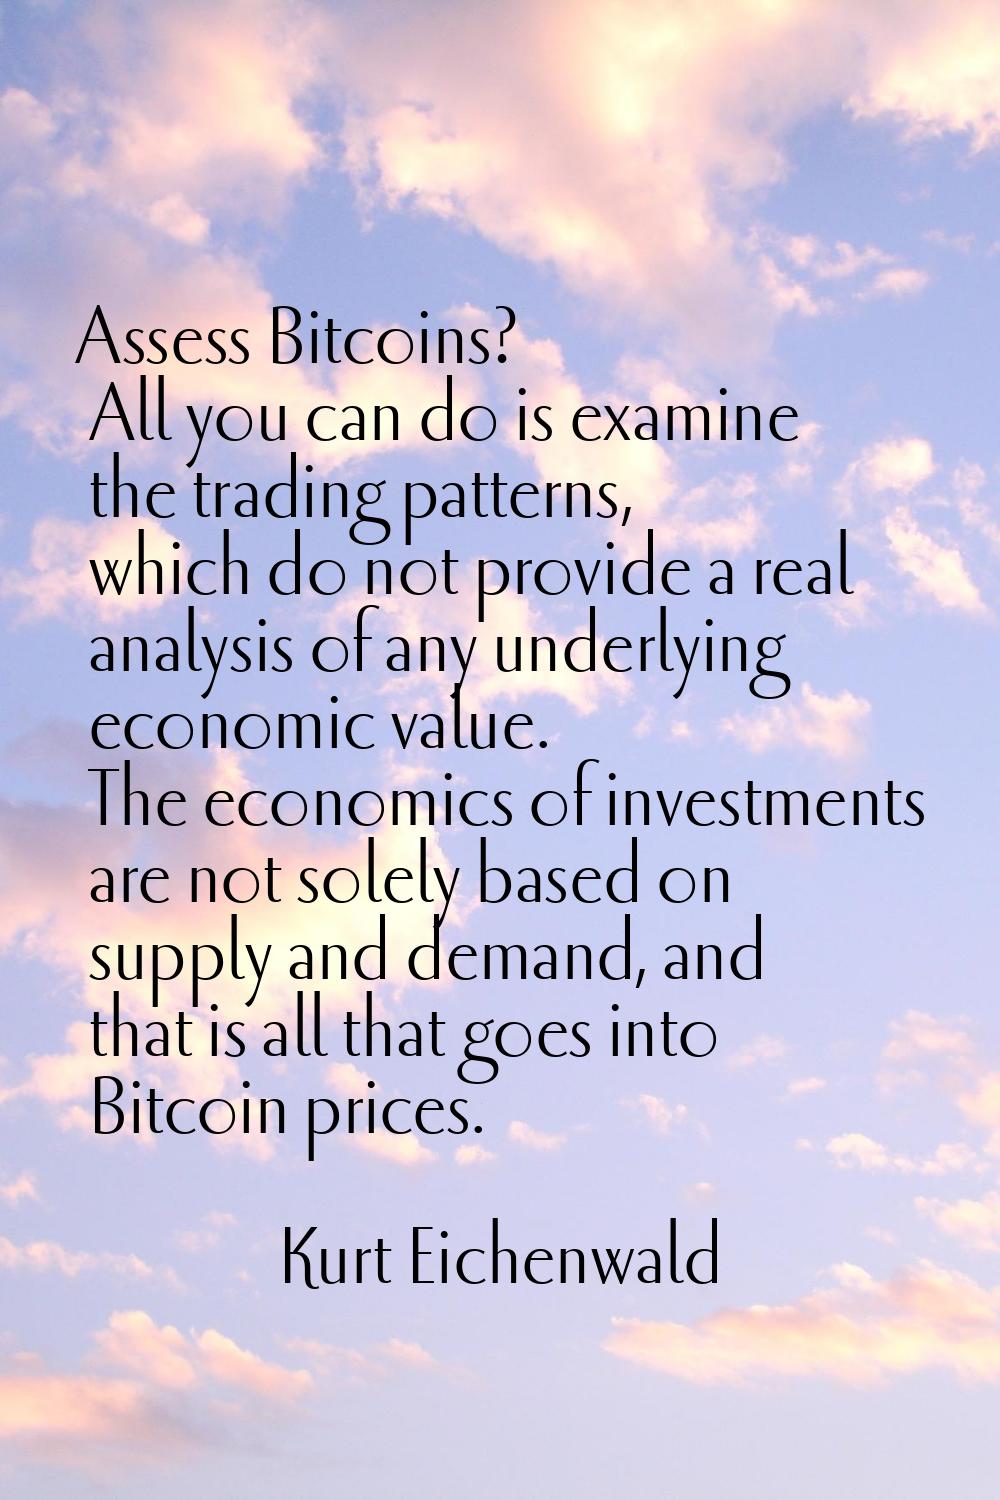 Assess Bitcoins? All you can do is examine the trading patterns, which do not provide a real analys